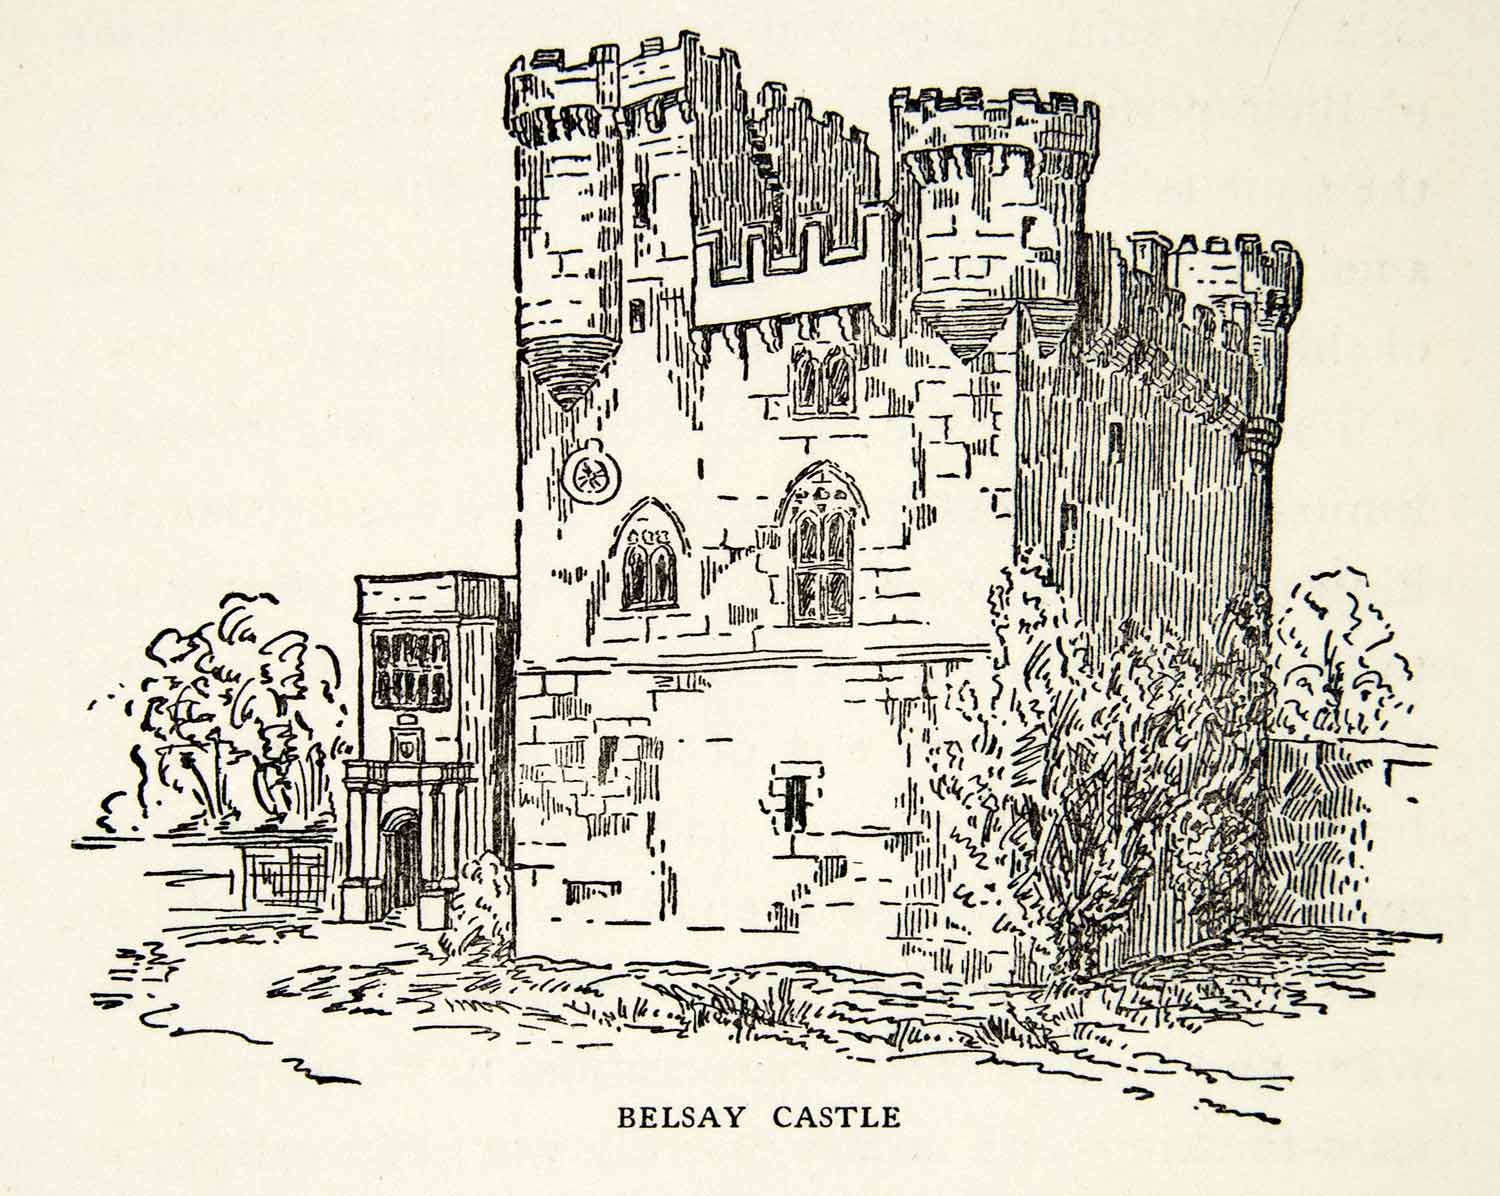 1939 Print Belsay Castle Middle Ages Medieval England Northumberland Pele XEBA4